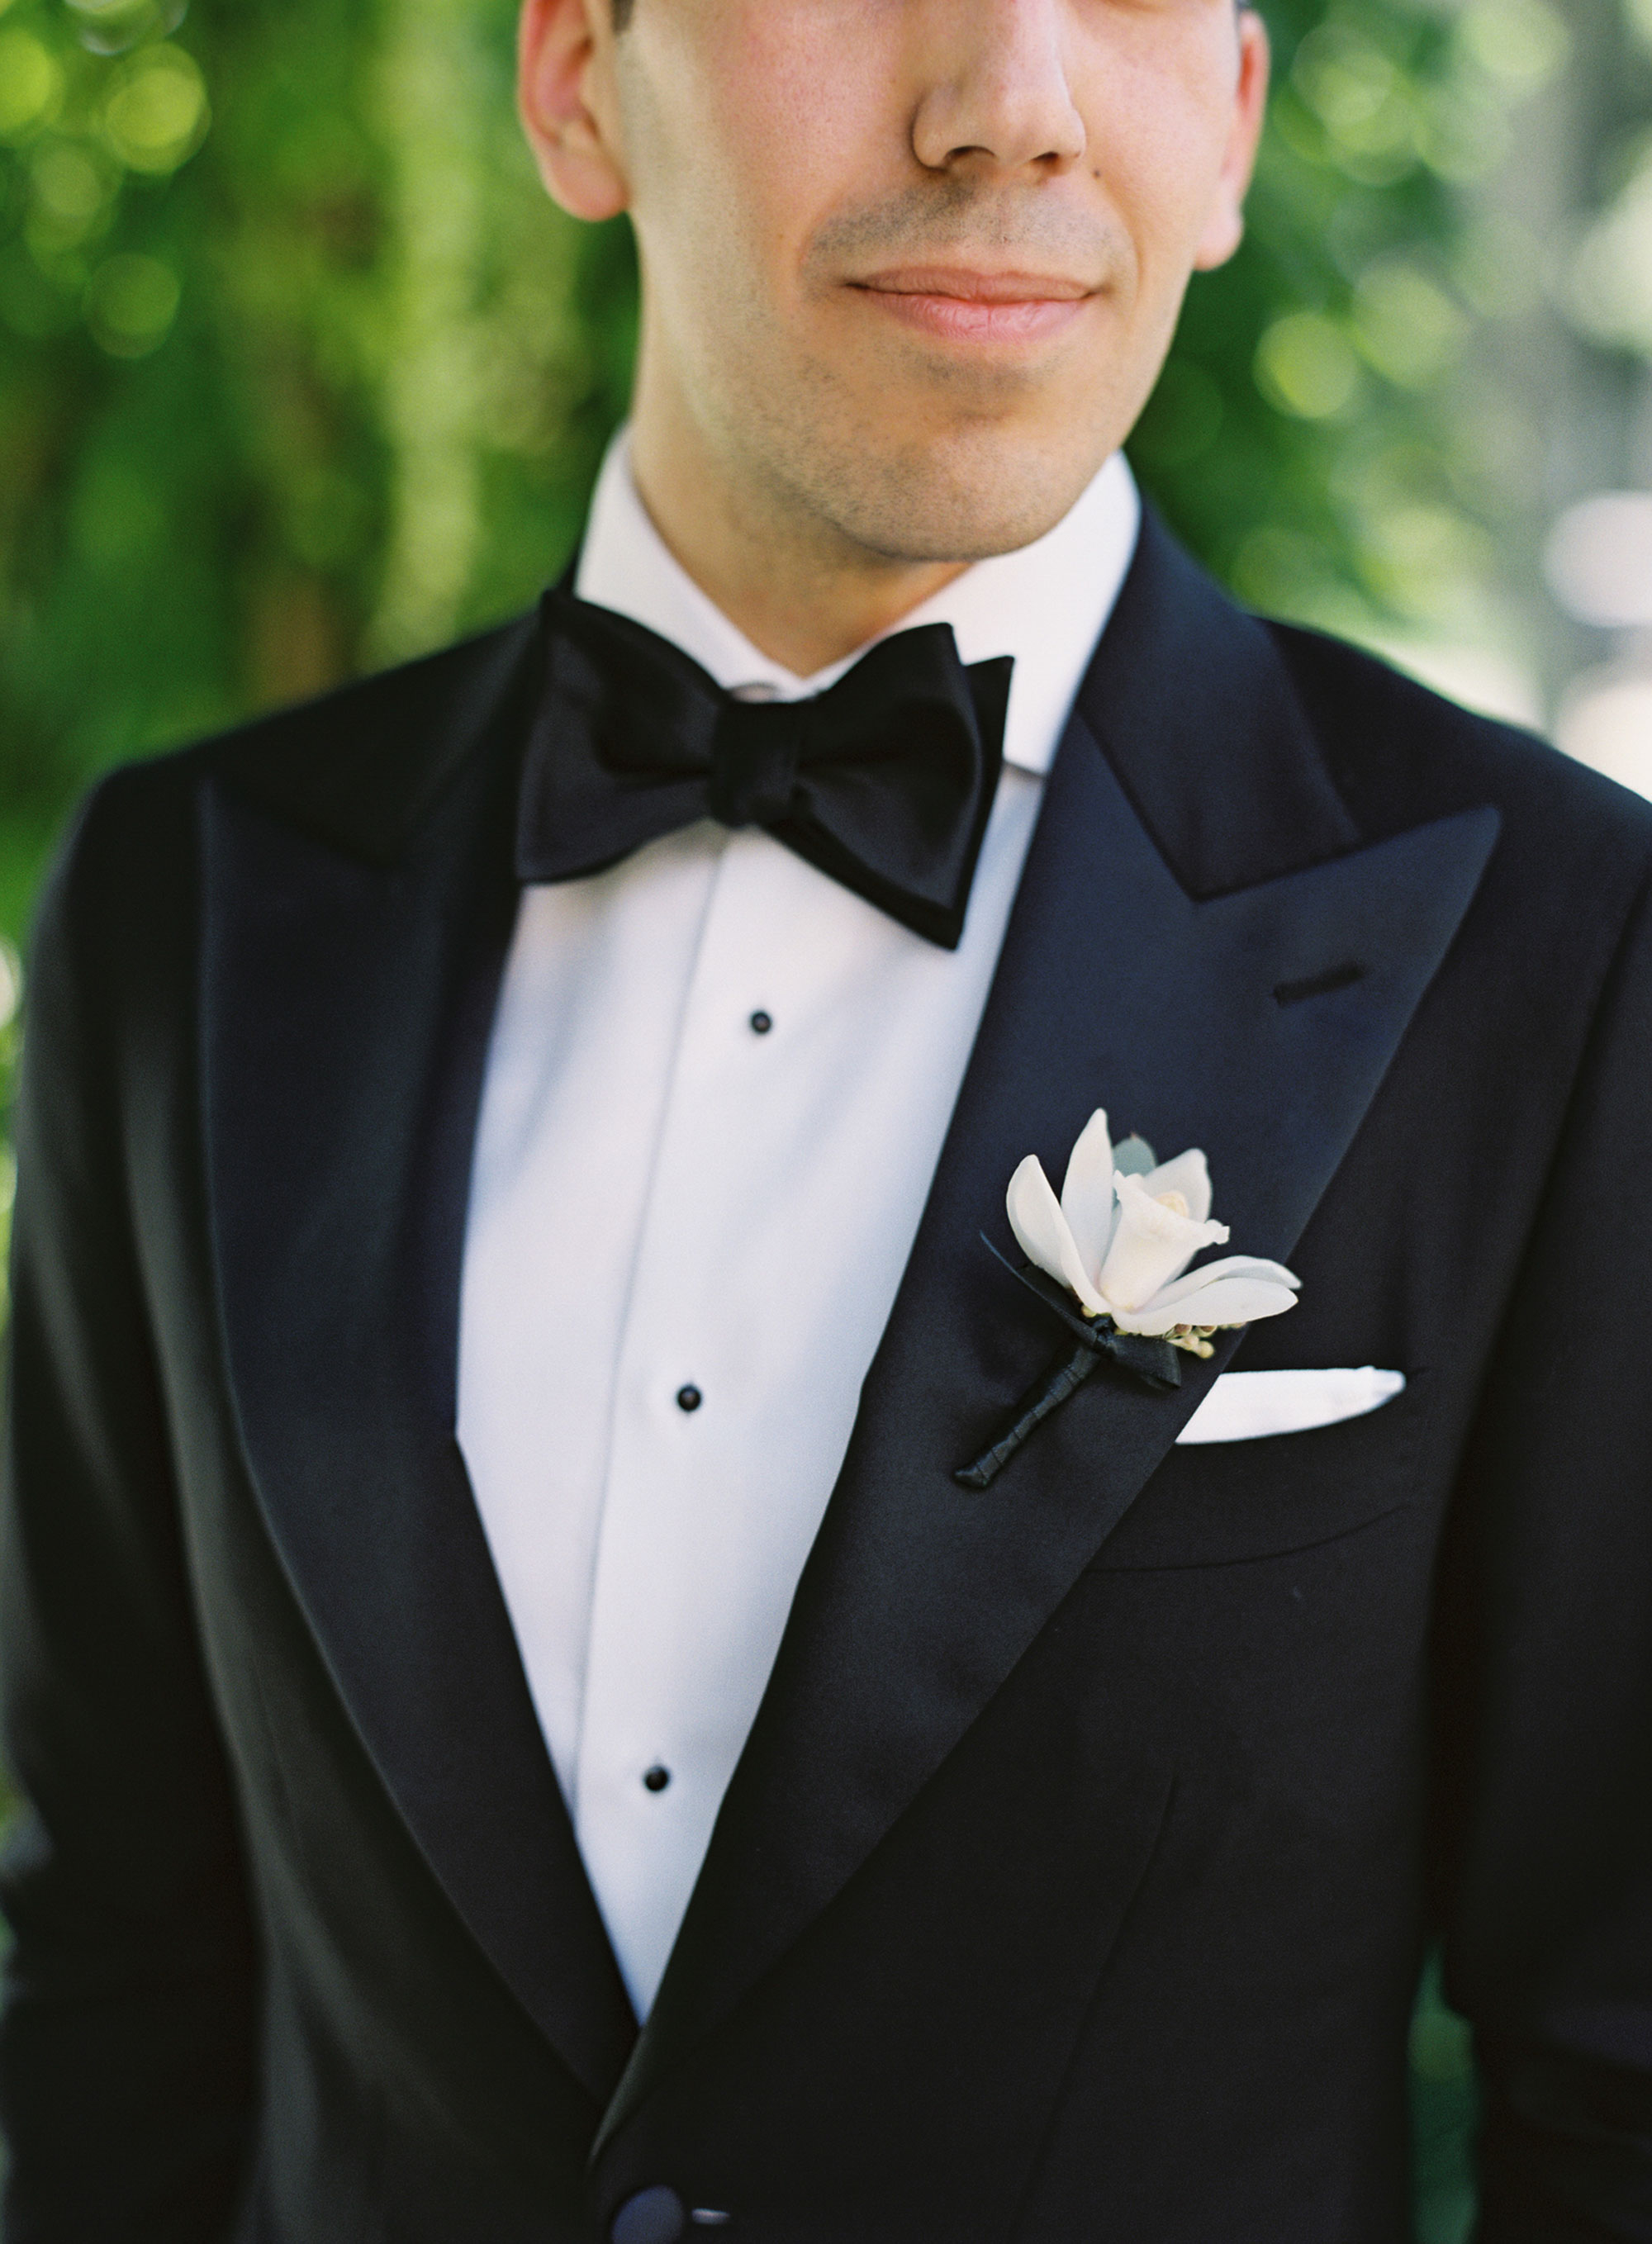 Groom's white orchid boutonniere by David Beam Experiences